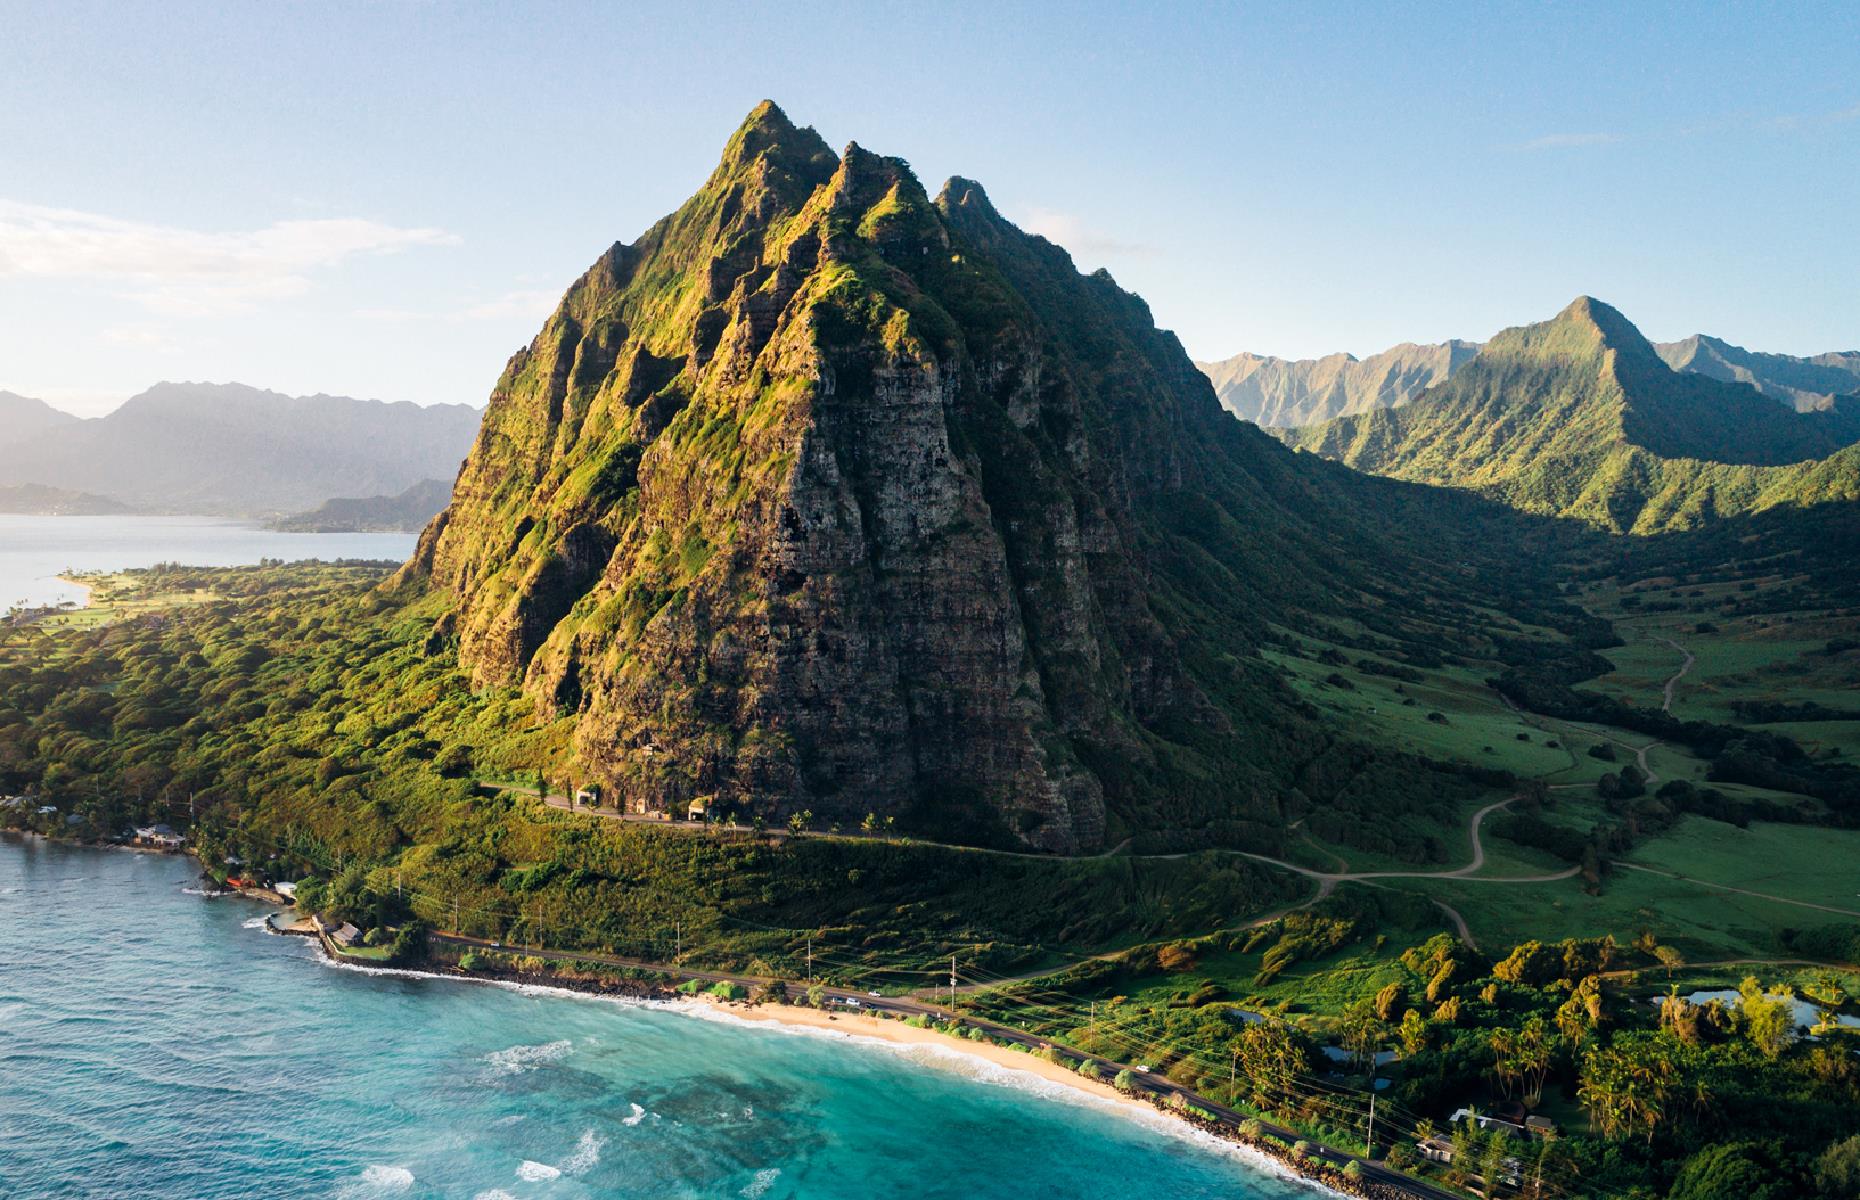 <p>If you're craving a retreat from southern Oahu's buzzier beaches, strike north-east to the Windward Coast and the lush Kualoa Ranch. This private nature reserve is carved up into two distinct sections: the south, home to the Hakipuʻu Valley rainforest, and the north (pictured), boasting the emerald Kaʻaʻawa Valley. The latter is nicknamed “Jurassic Valley” and features in several films in the <em>Jurassic Park</em> franchise. </p>  <p><a href="http://bit.ly/3roL4wv"><strong>Love this? Follow our Facebook page for more travel inspiration</strong></a></p>